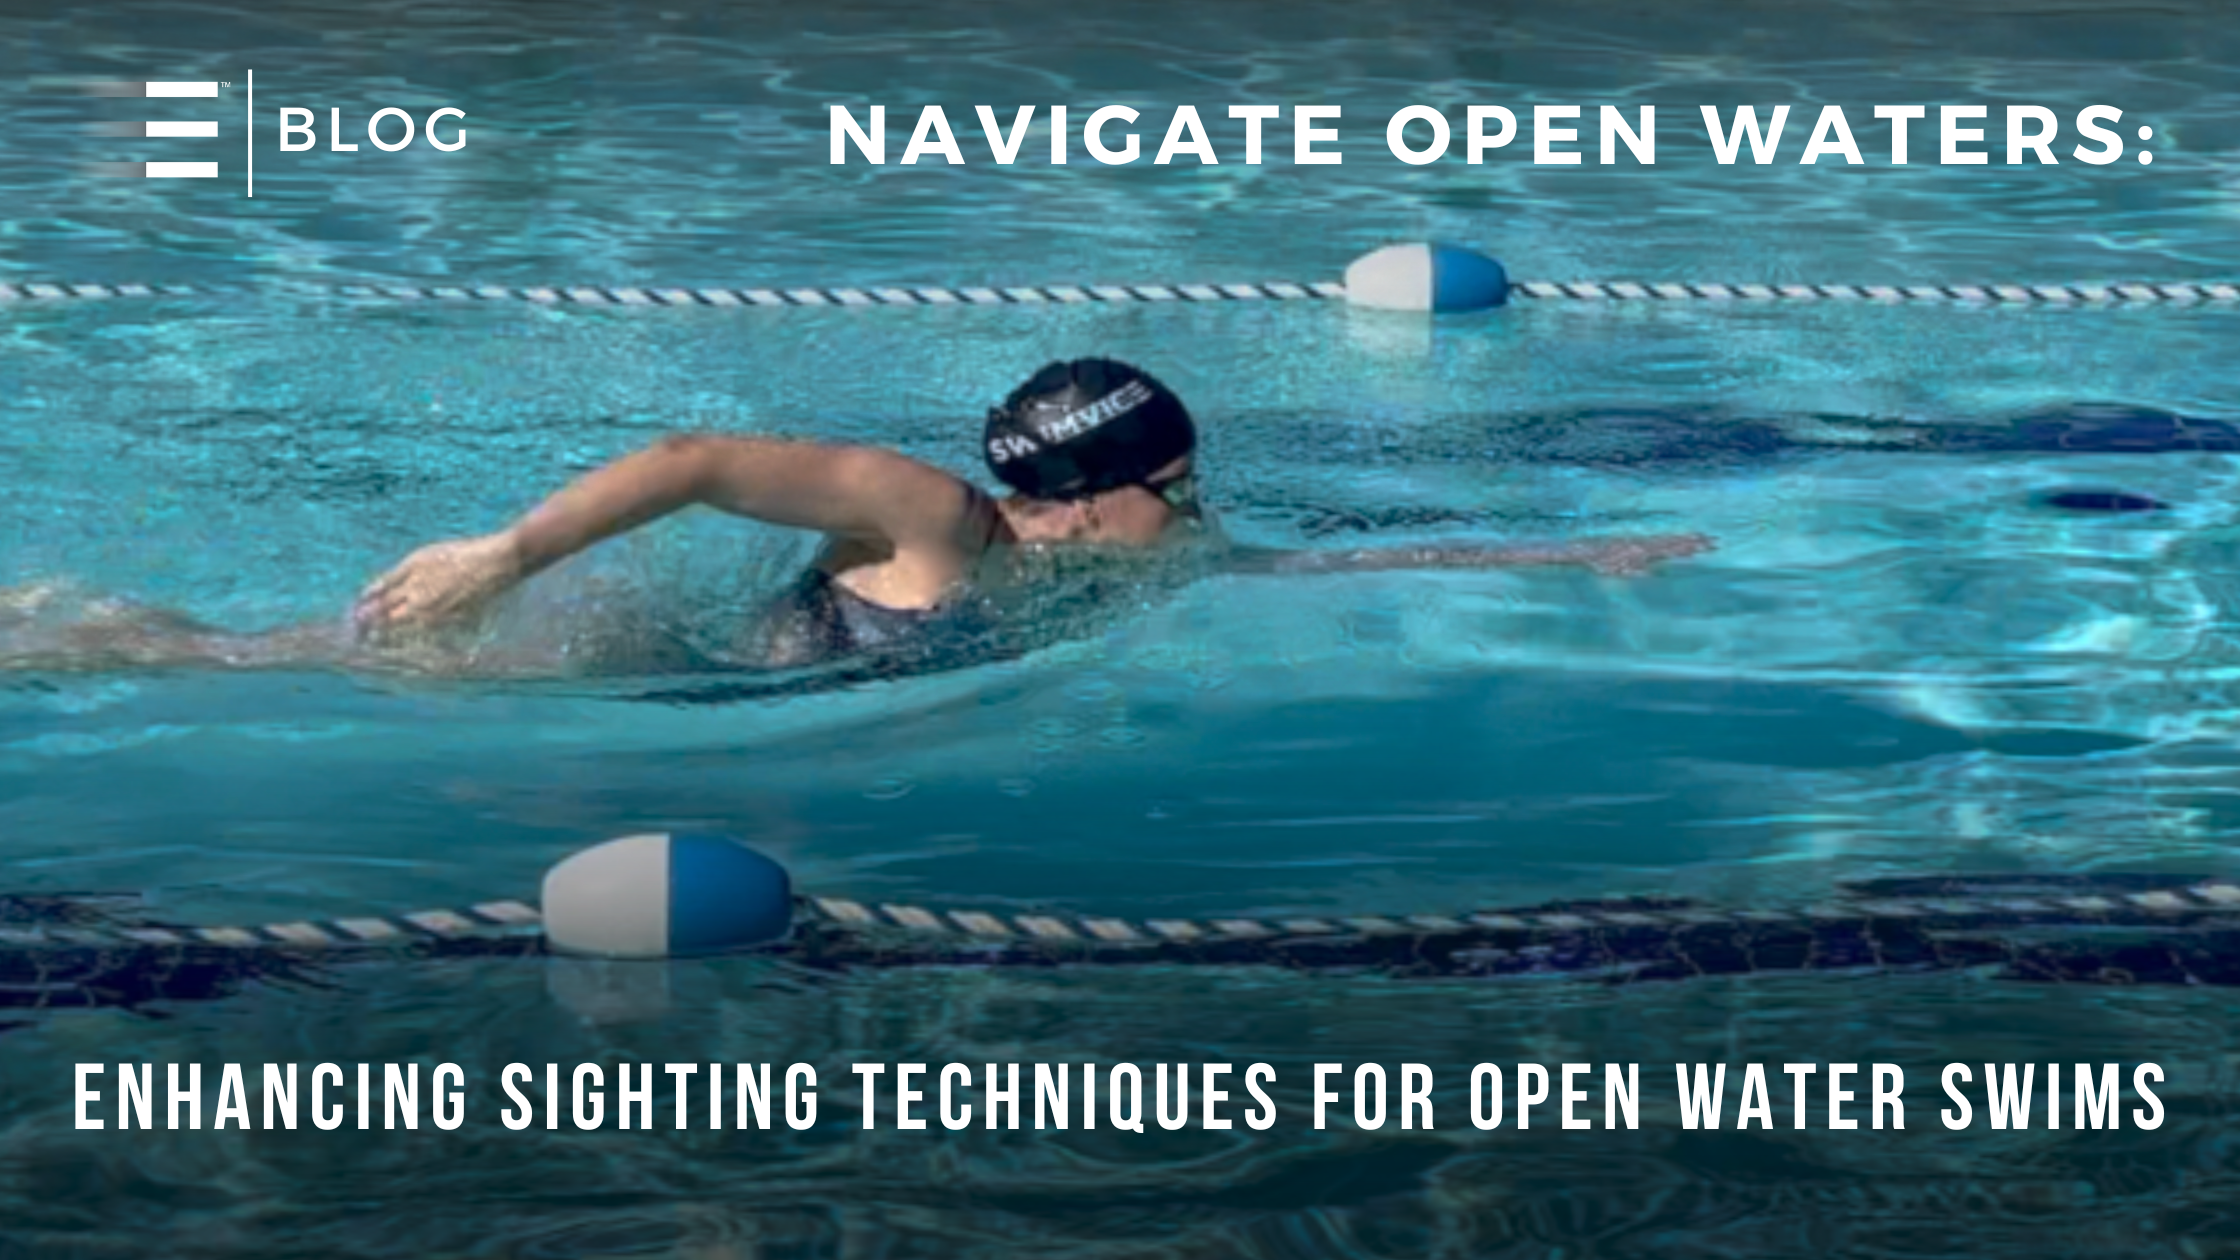 Coach Mandy demonstrating sighting techniques for open water swims